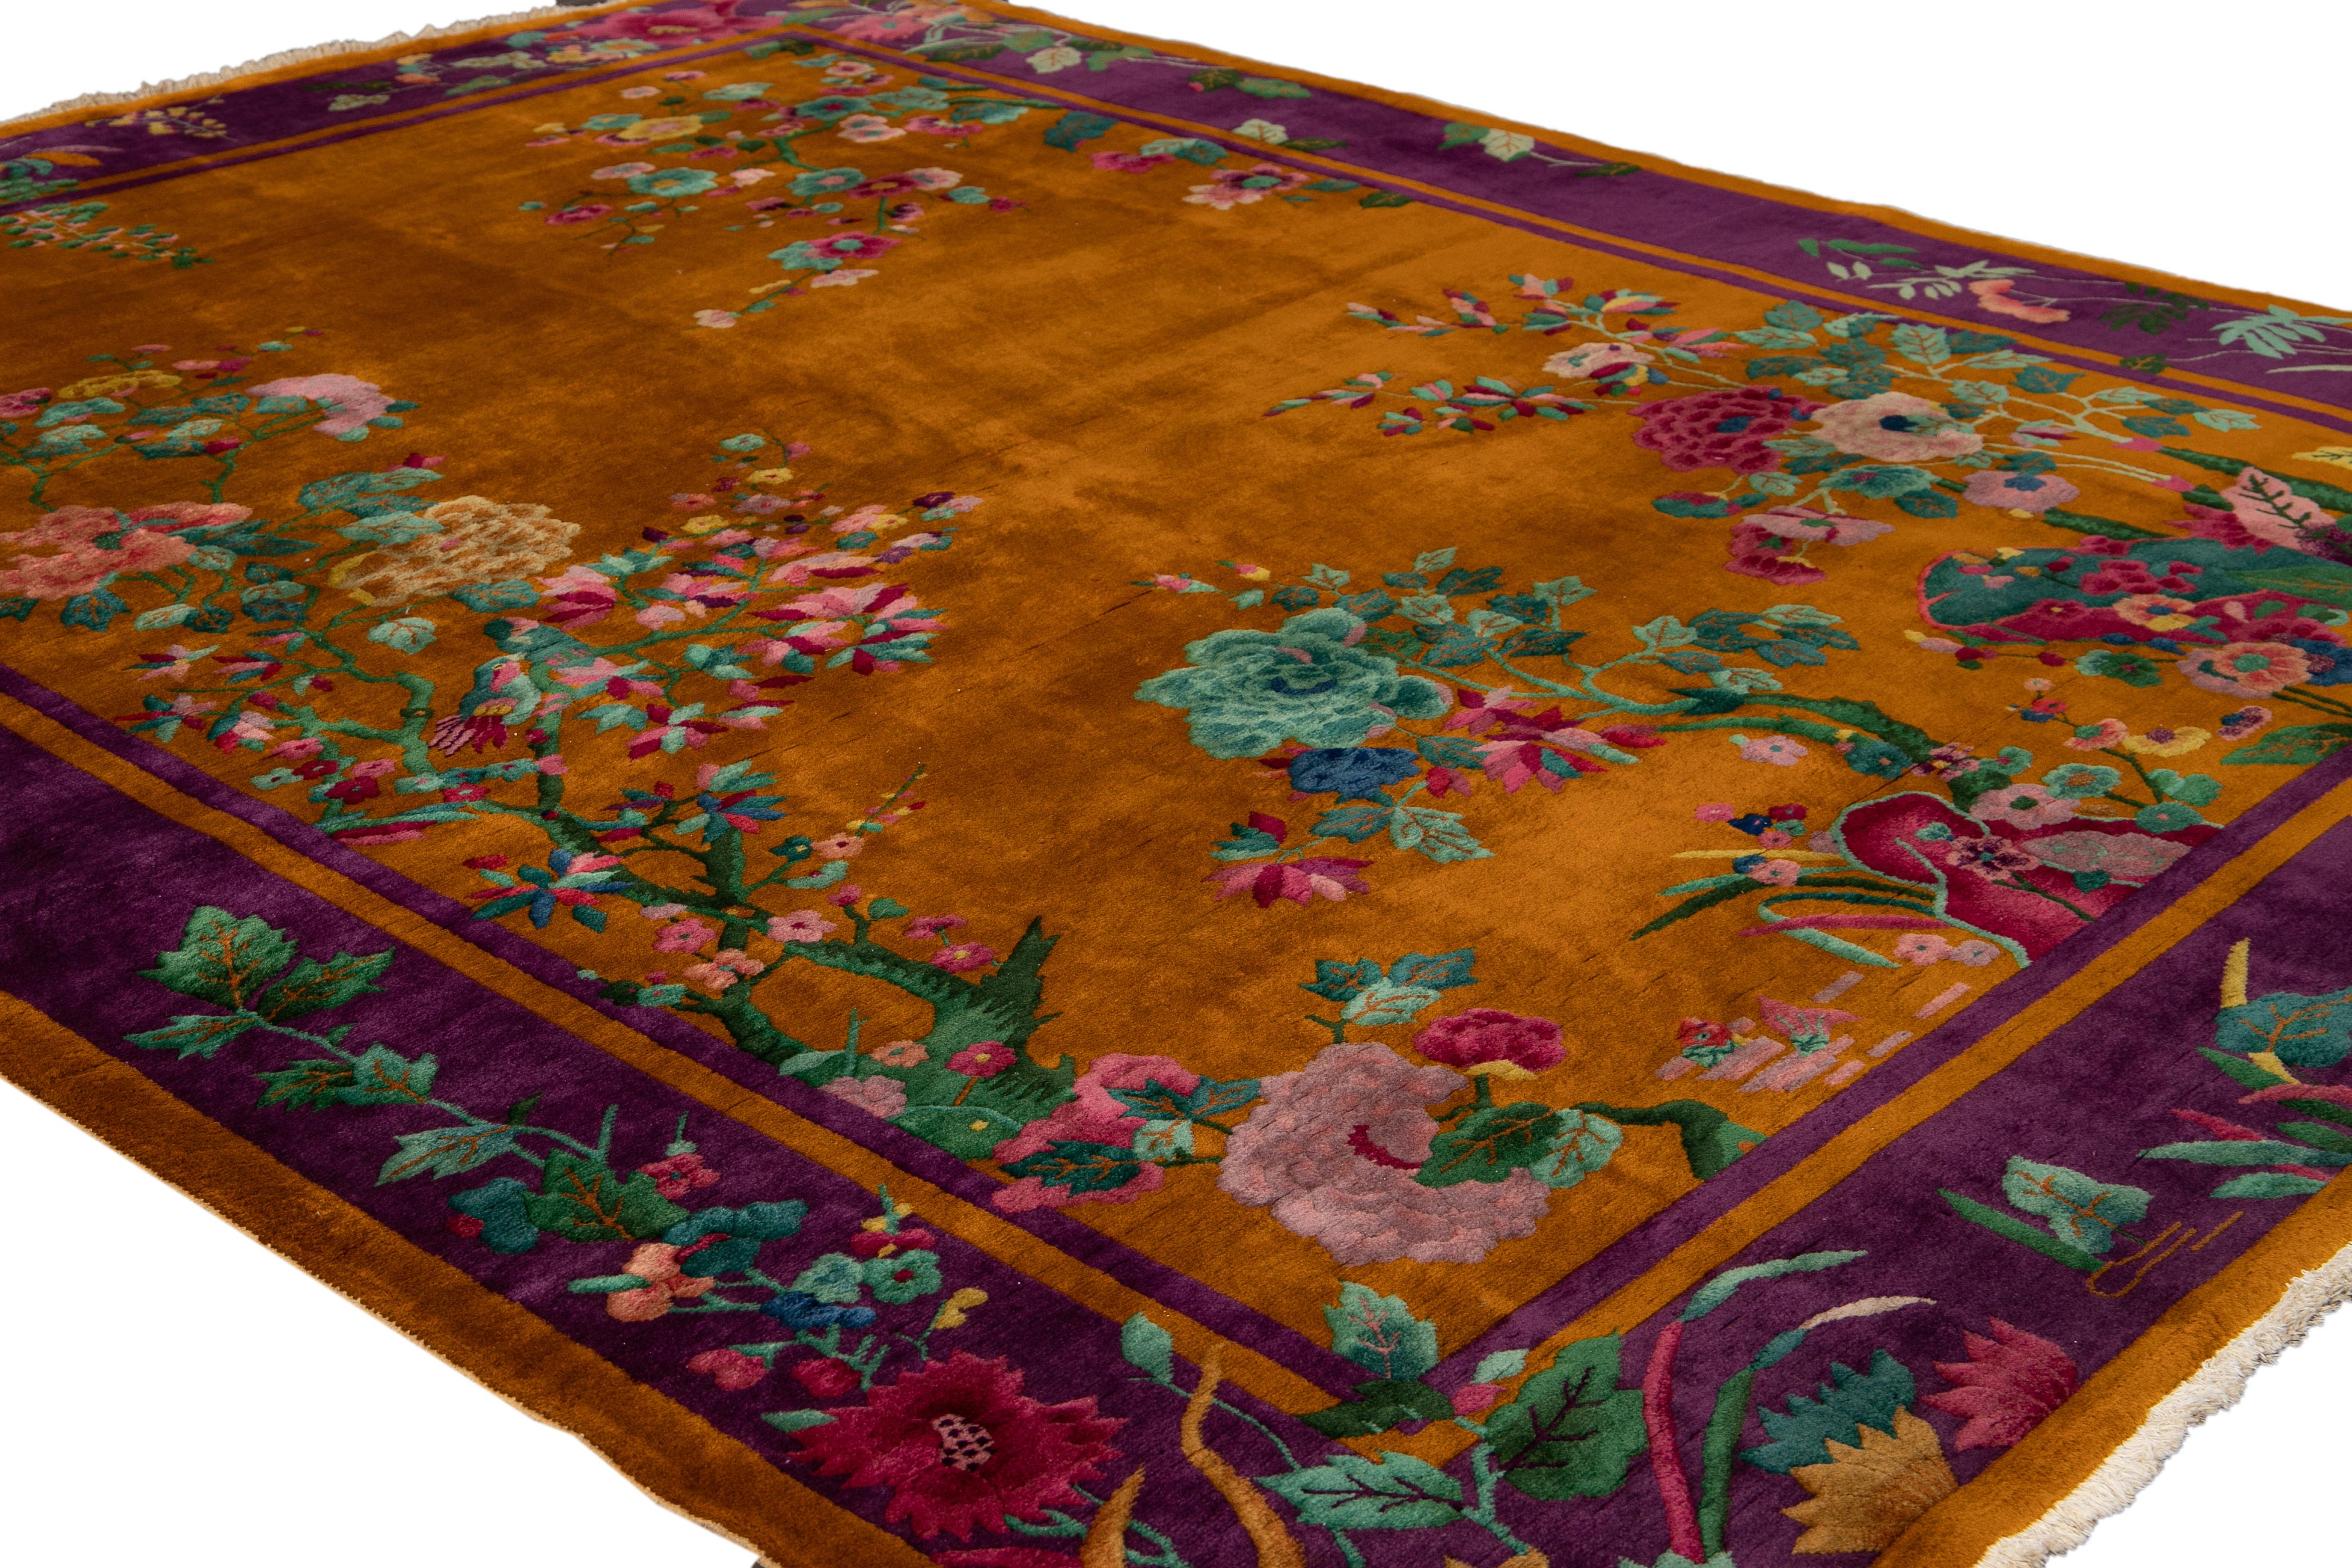 Antique Art Deco Orange and Purple Chinese Handmade Floral Wool Rug 1